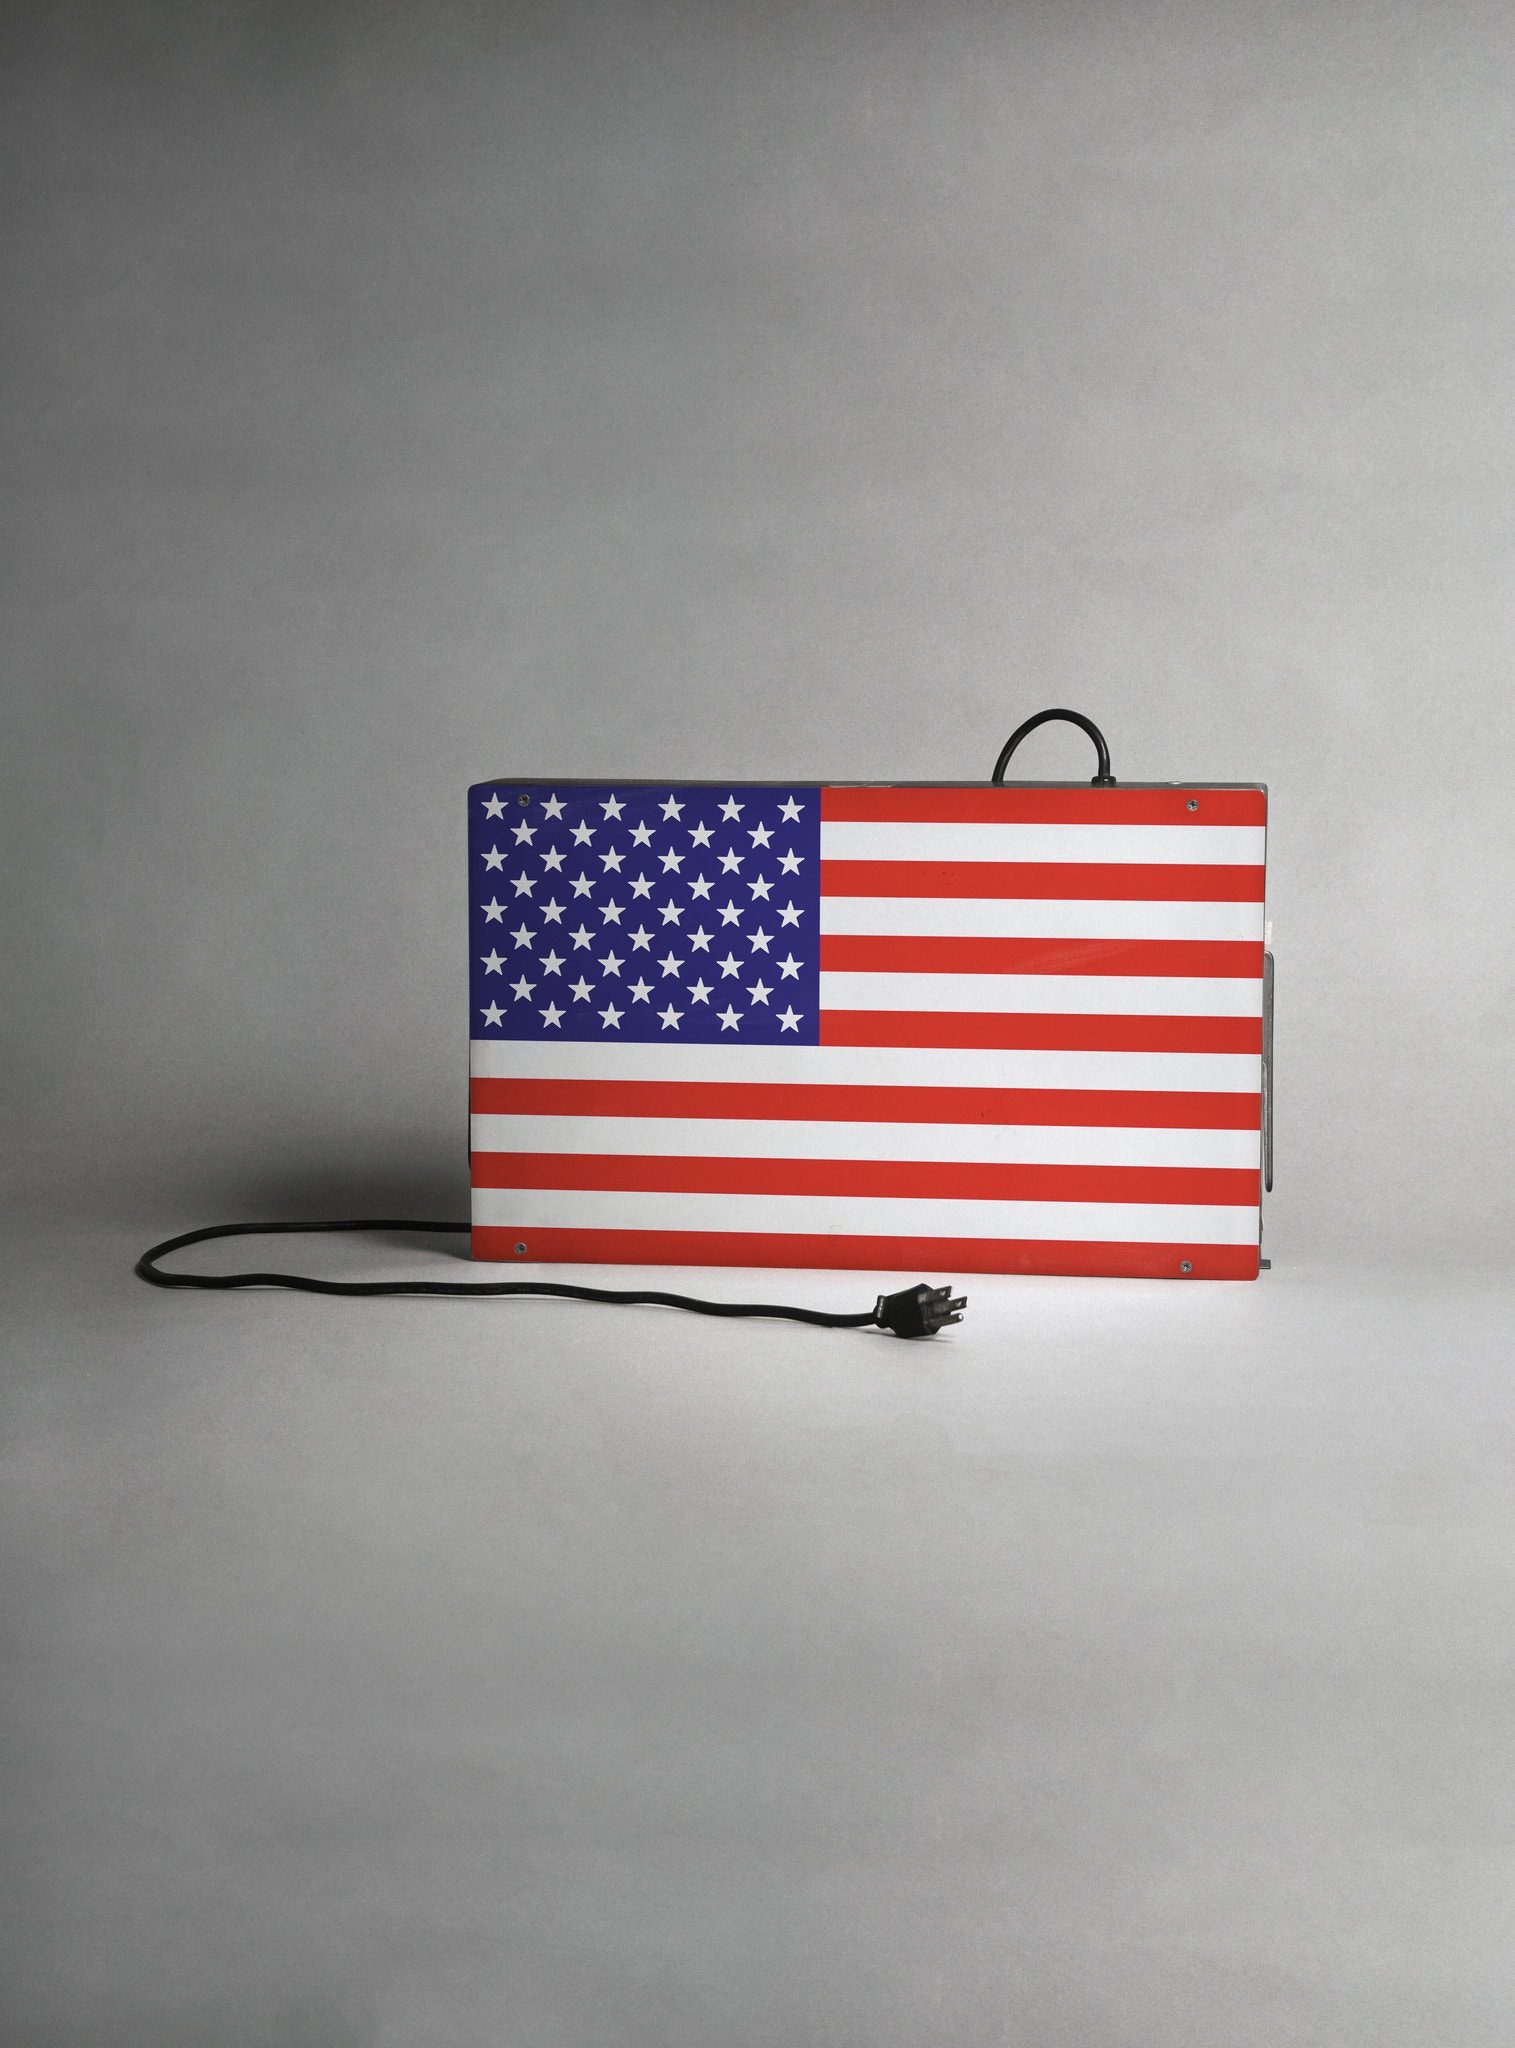 Image of a lamp in the shape and colours of the American flag, unplugged